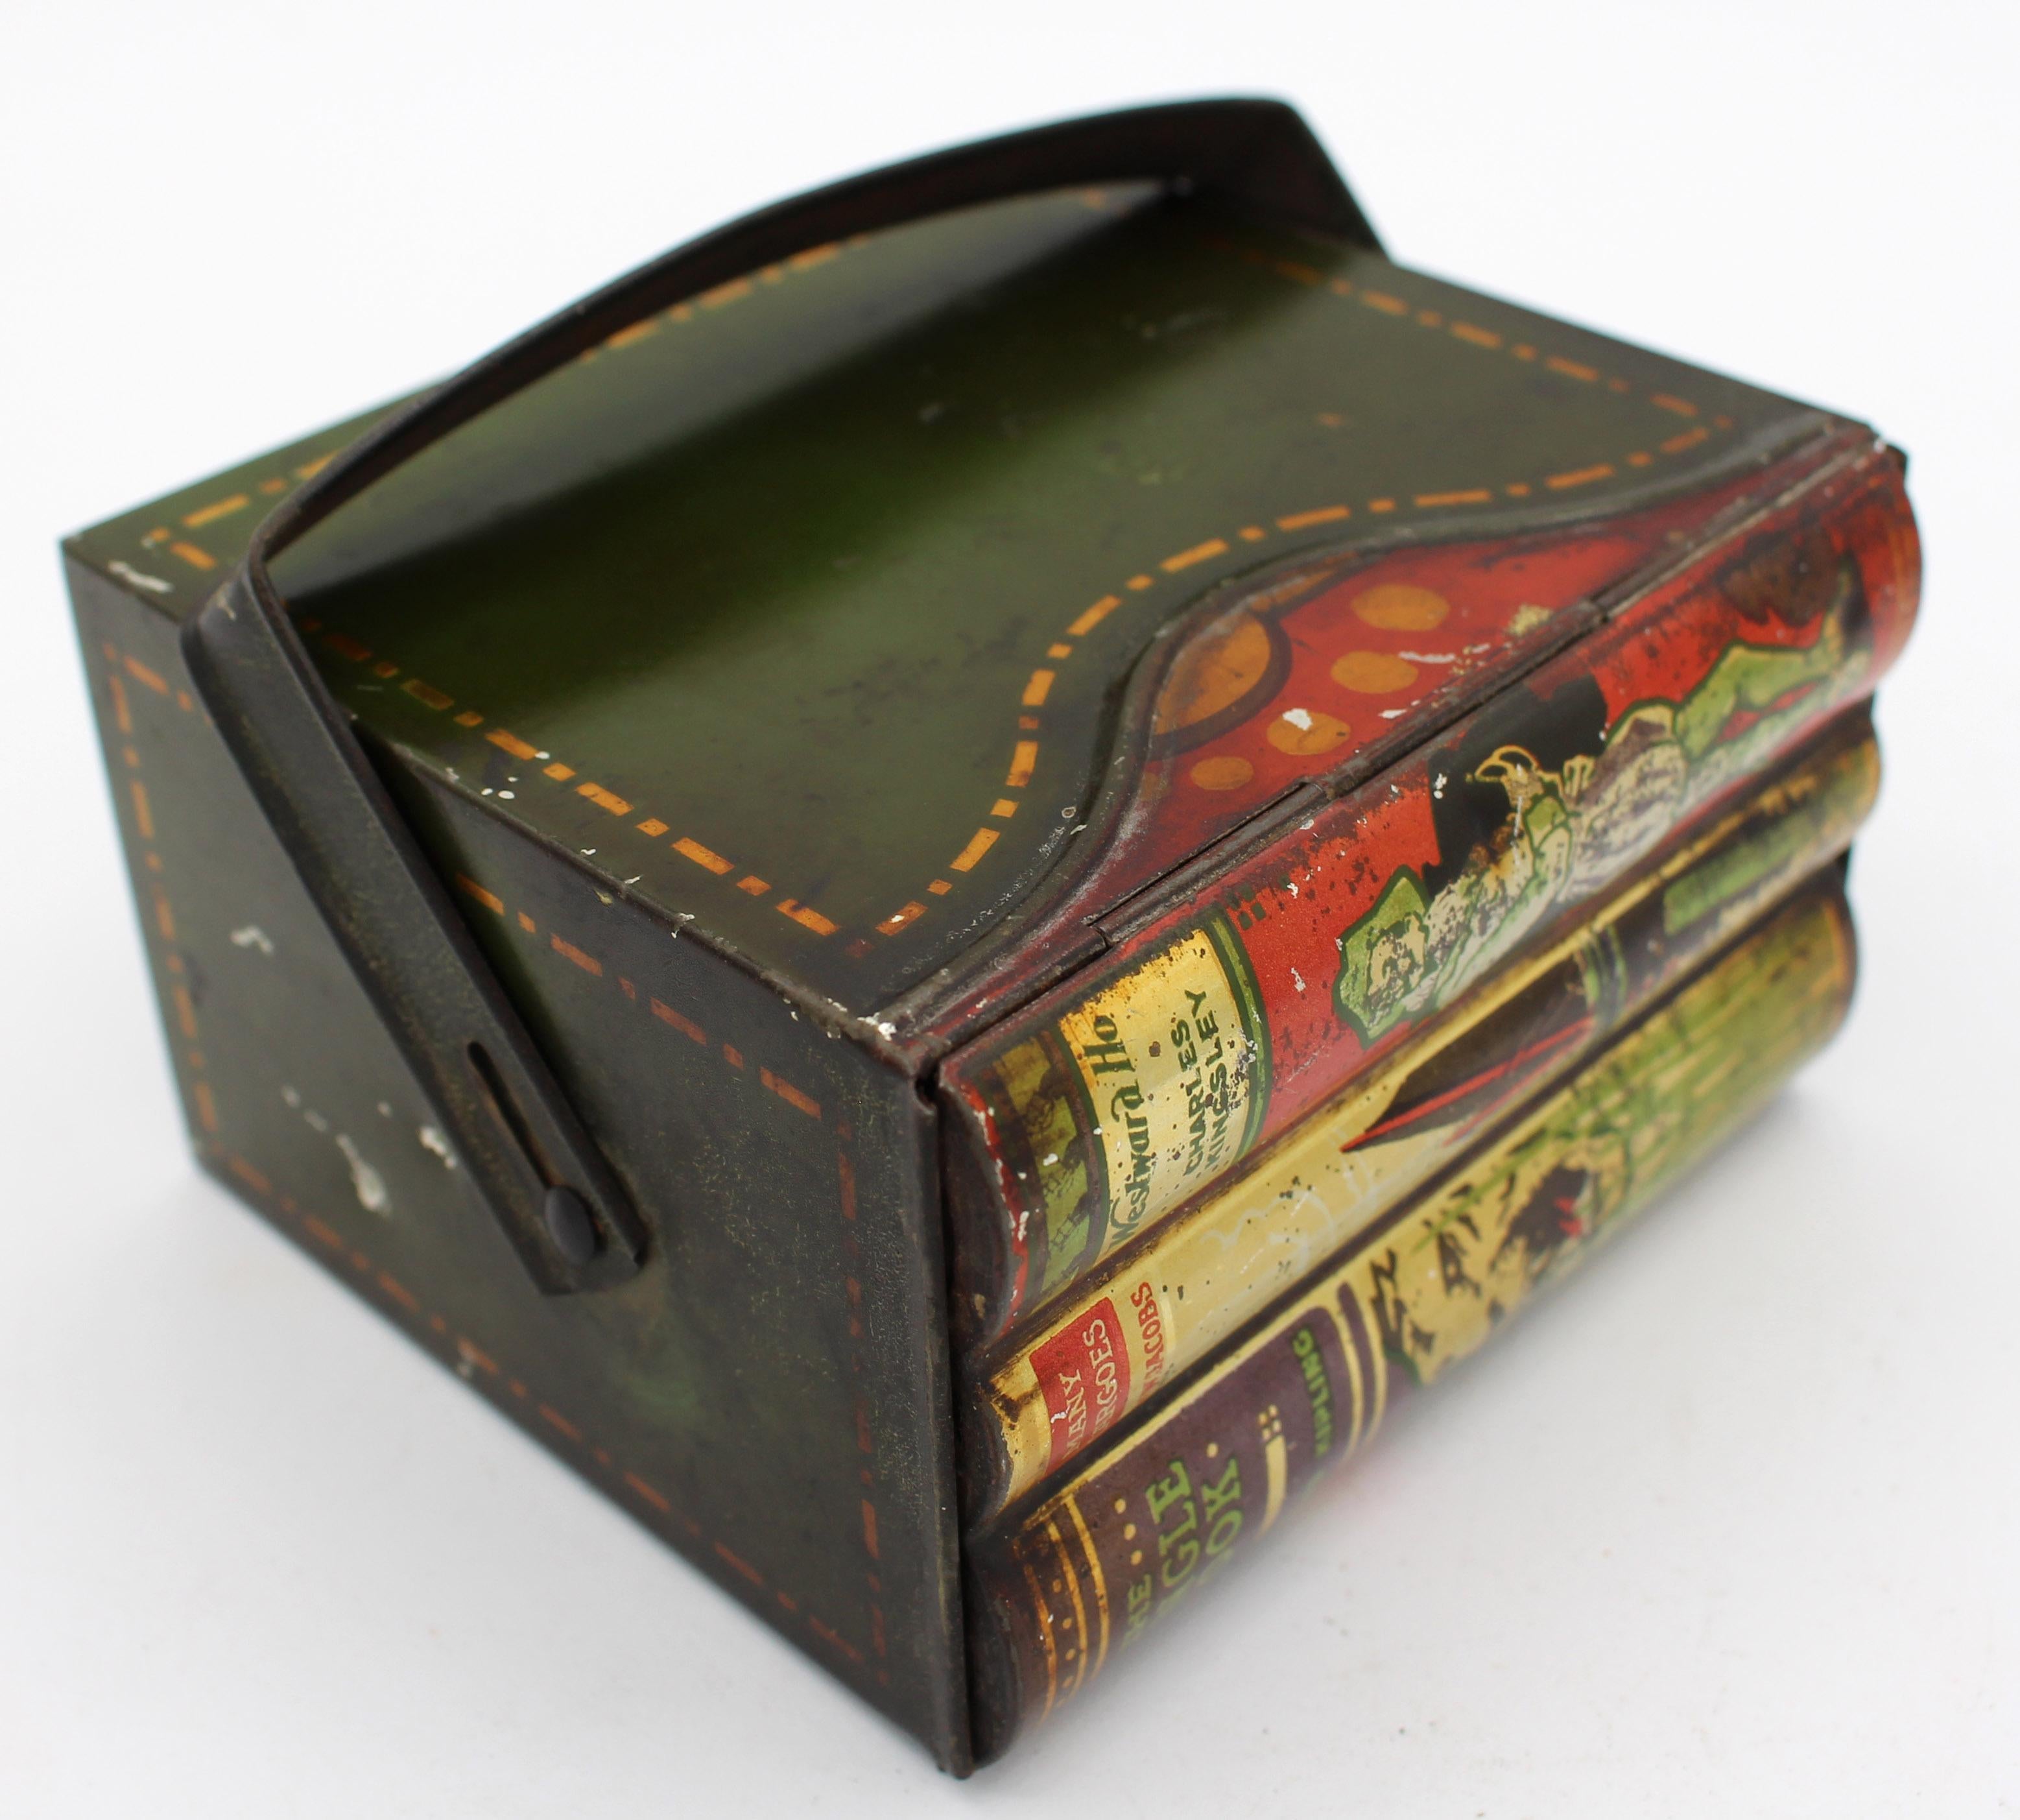 Child's books & carrier form biscuit tin box by Huntley & Palmers, early 20th century, English. Three faux children's adventure story books in sliding handled carrier. Green & gilt painted outer carrier, the book ends each colorfully painted.